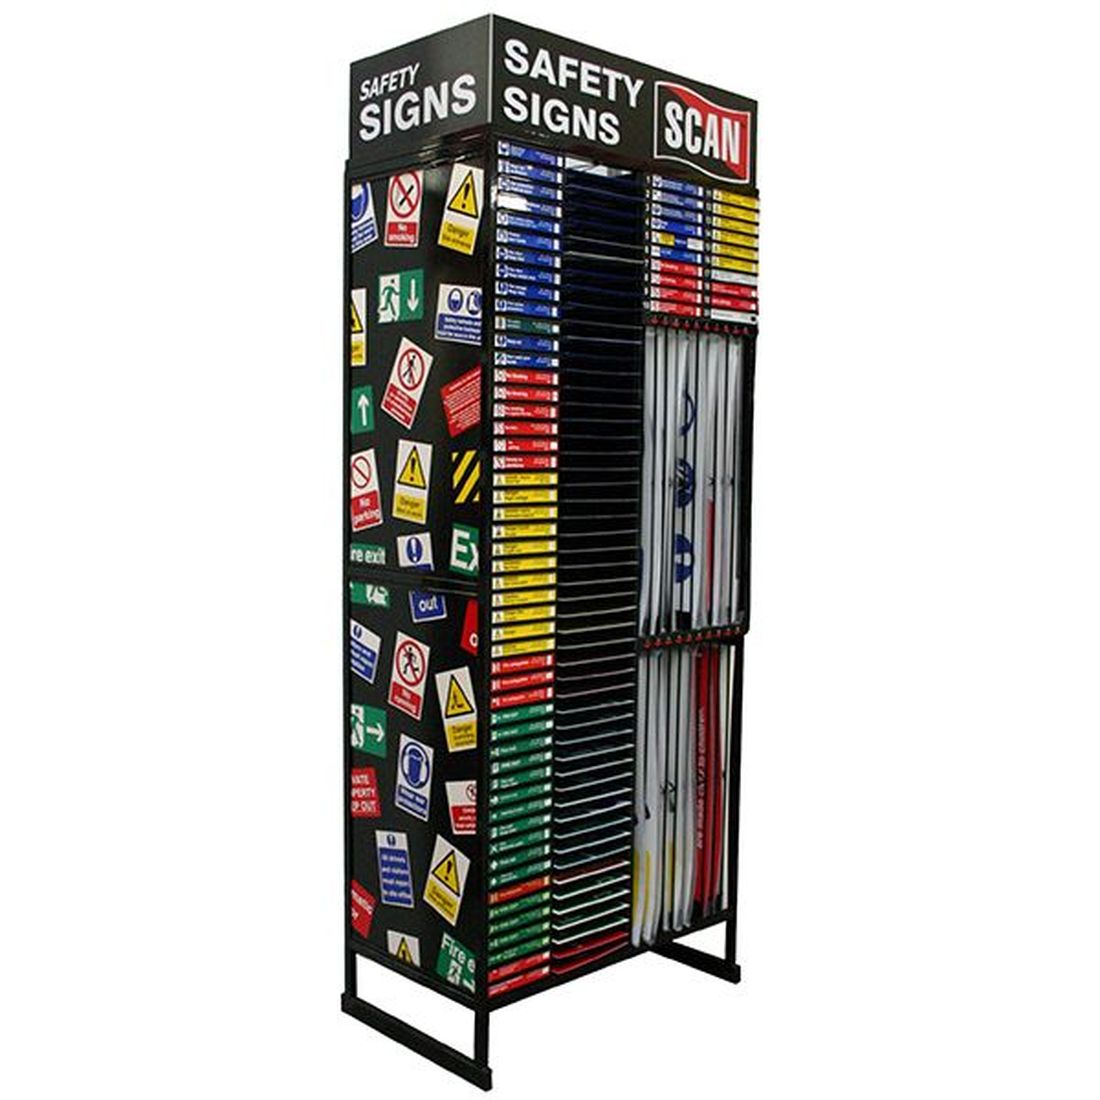 Scan Signs Display - 144 Signs (Combi Stand)                                         